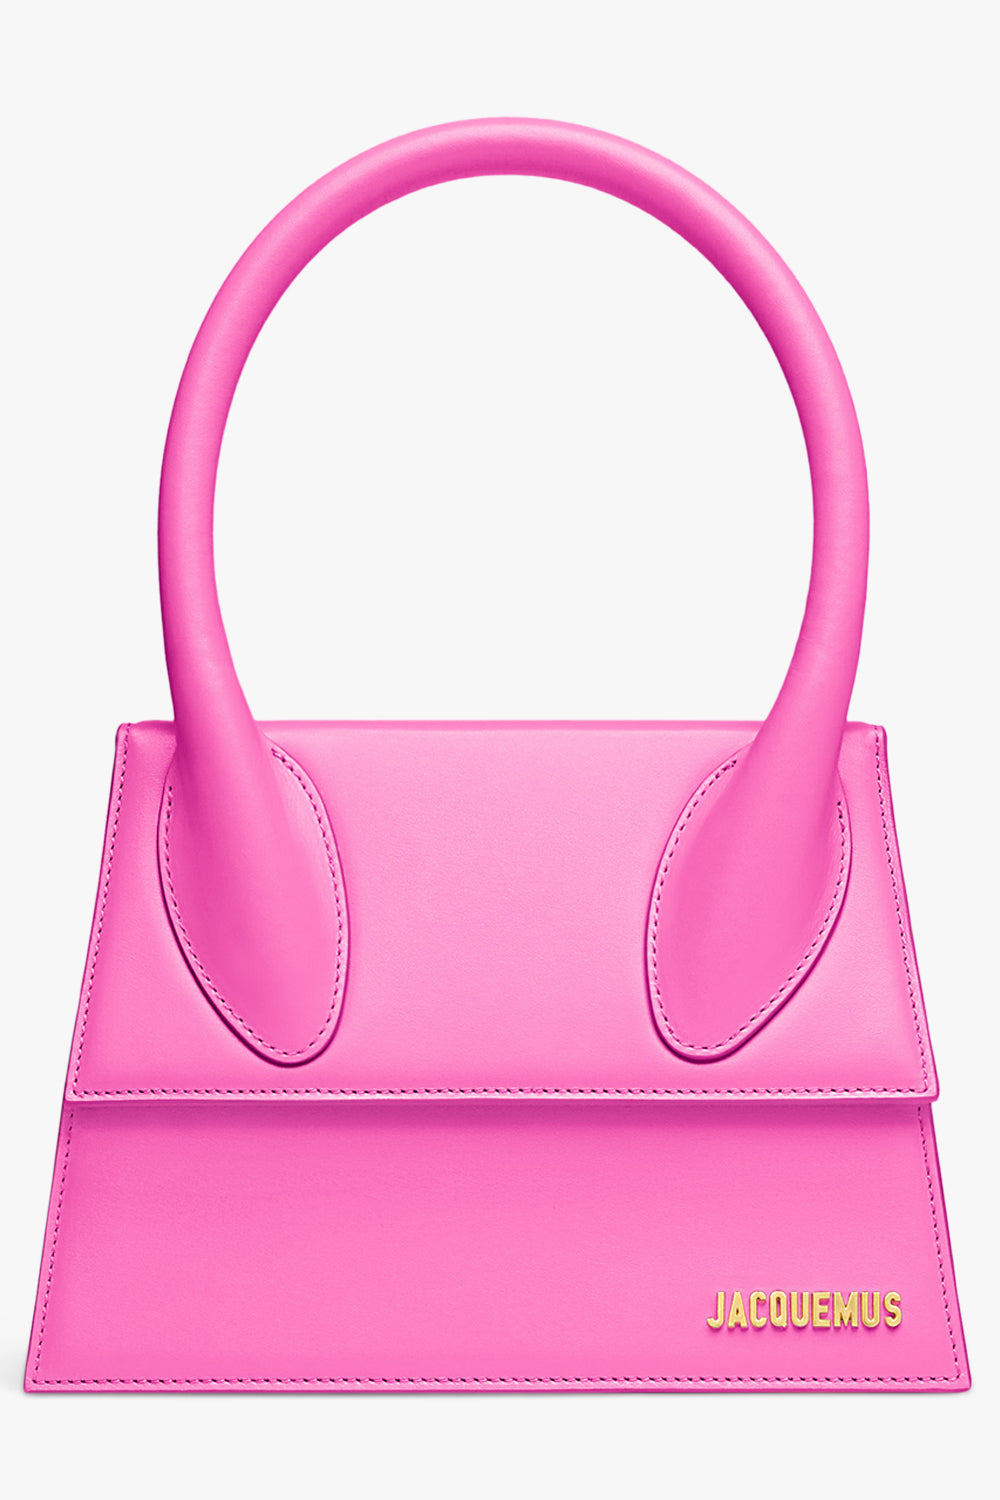 JACQUEMUS BAGS Pink Le Grand Chiquito Bag | Neon Pink